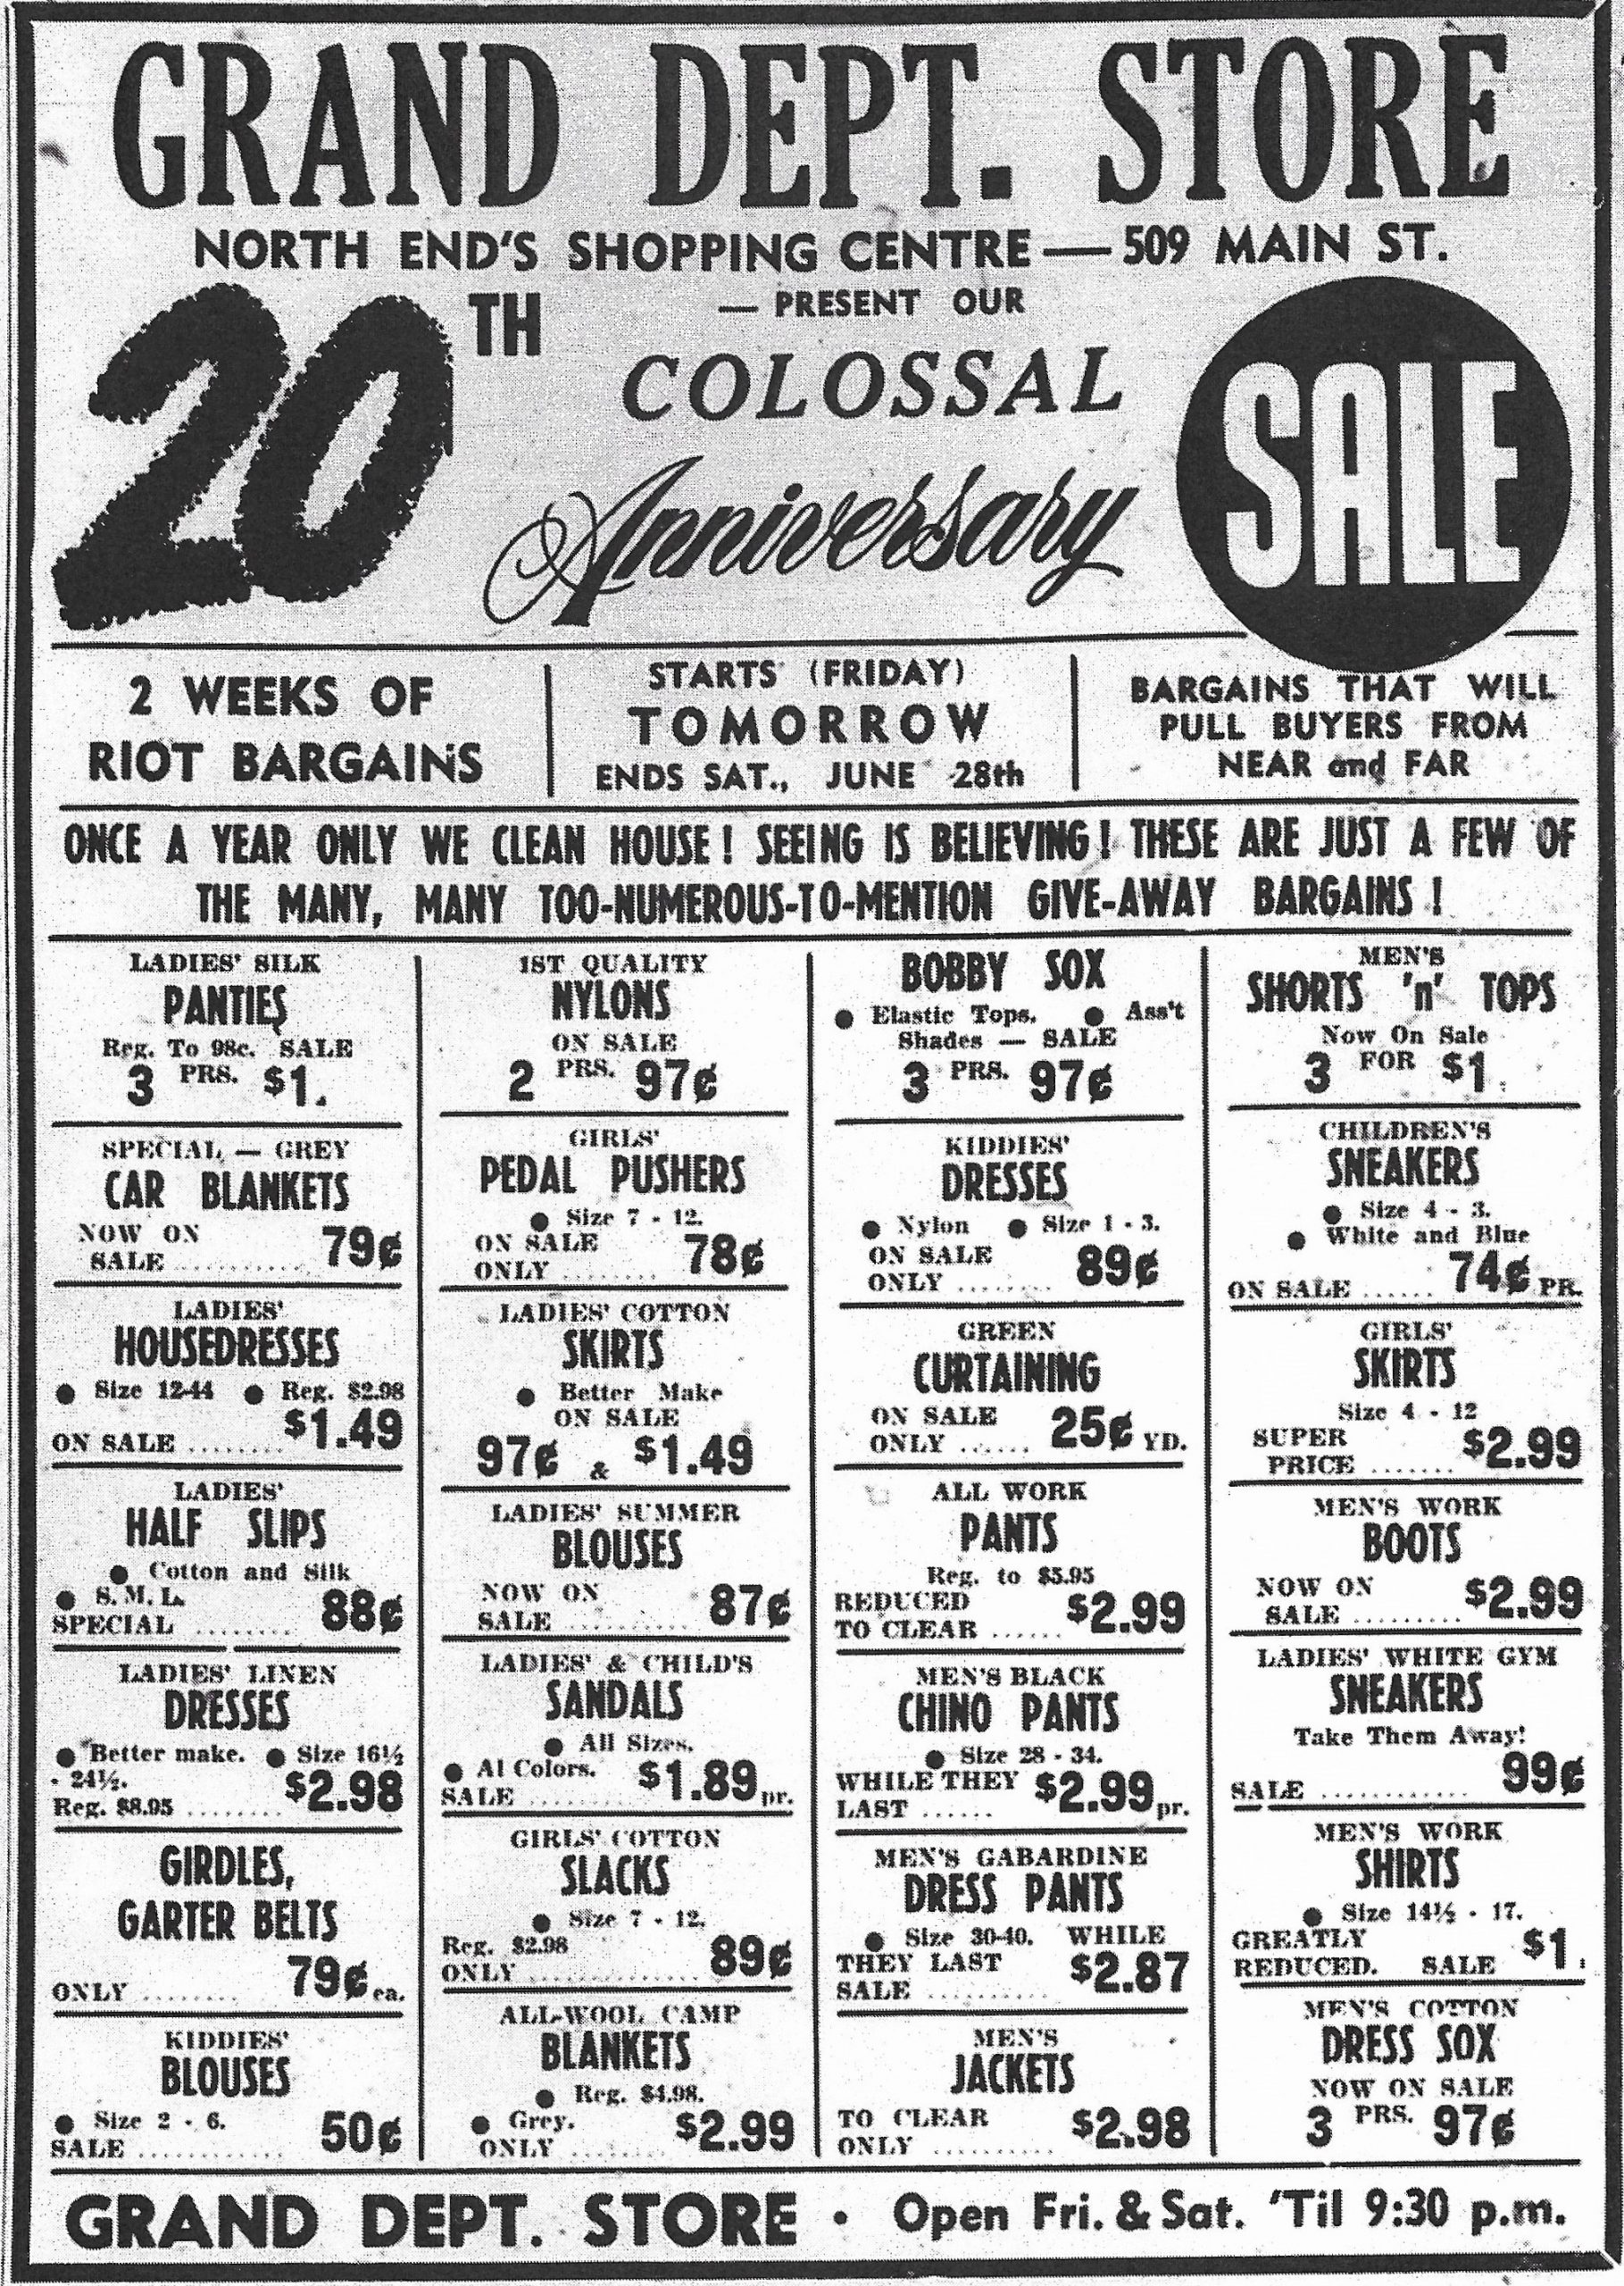 Newspaper advertisement – “Grand Department Store – North End’s Shopping Centre presents our Colossal 20th Anniversary Sale” – designed as a table with 28 squares, each with a special item.